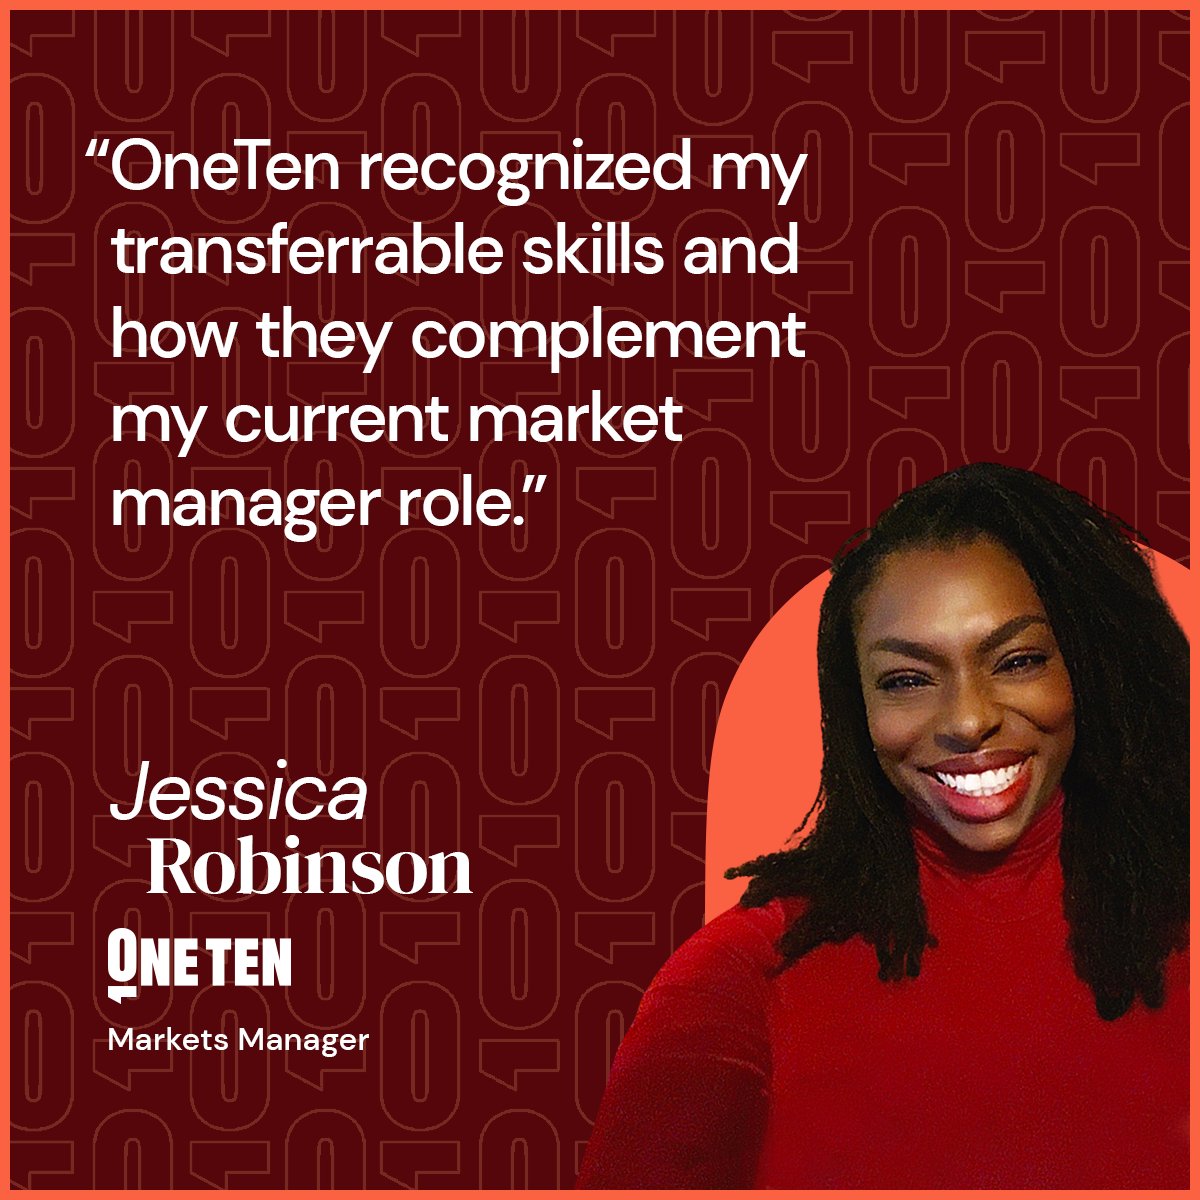 Jess spent a decade in HR, developing skills in leadership and problem-solving. But without a degree, she encountered limited opportunities, until she found @OneTen! Now, her skills aren’t just acknowledged but celebrated! #HireSkillsFirst